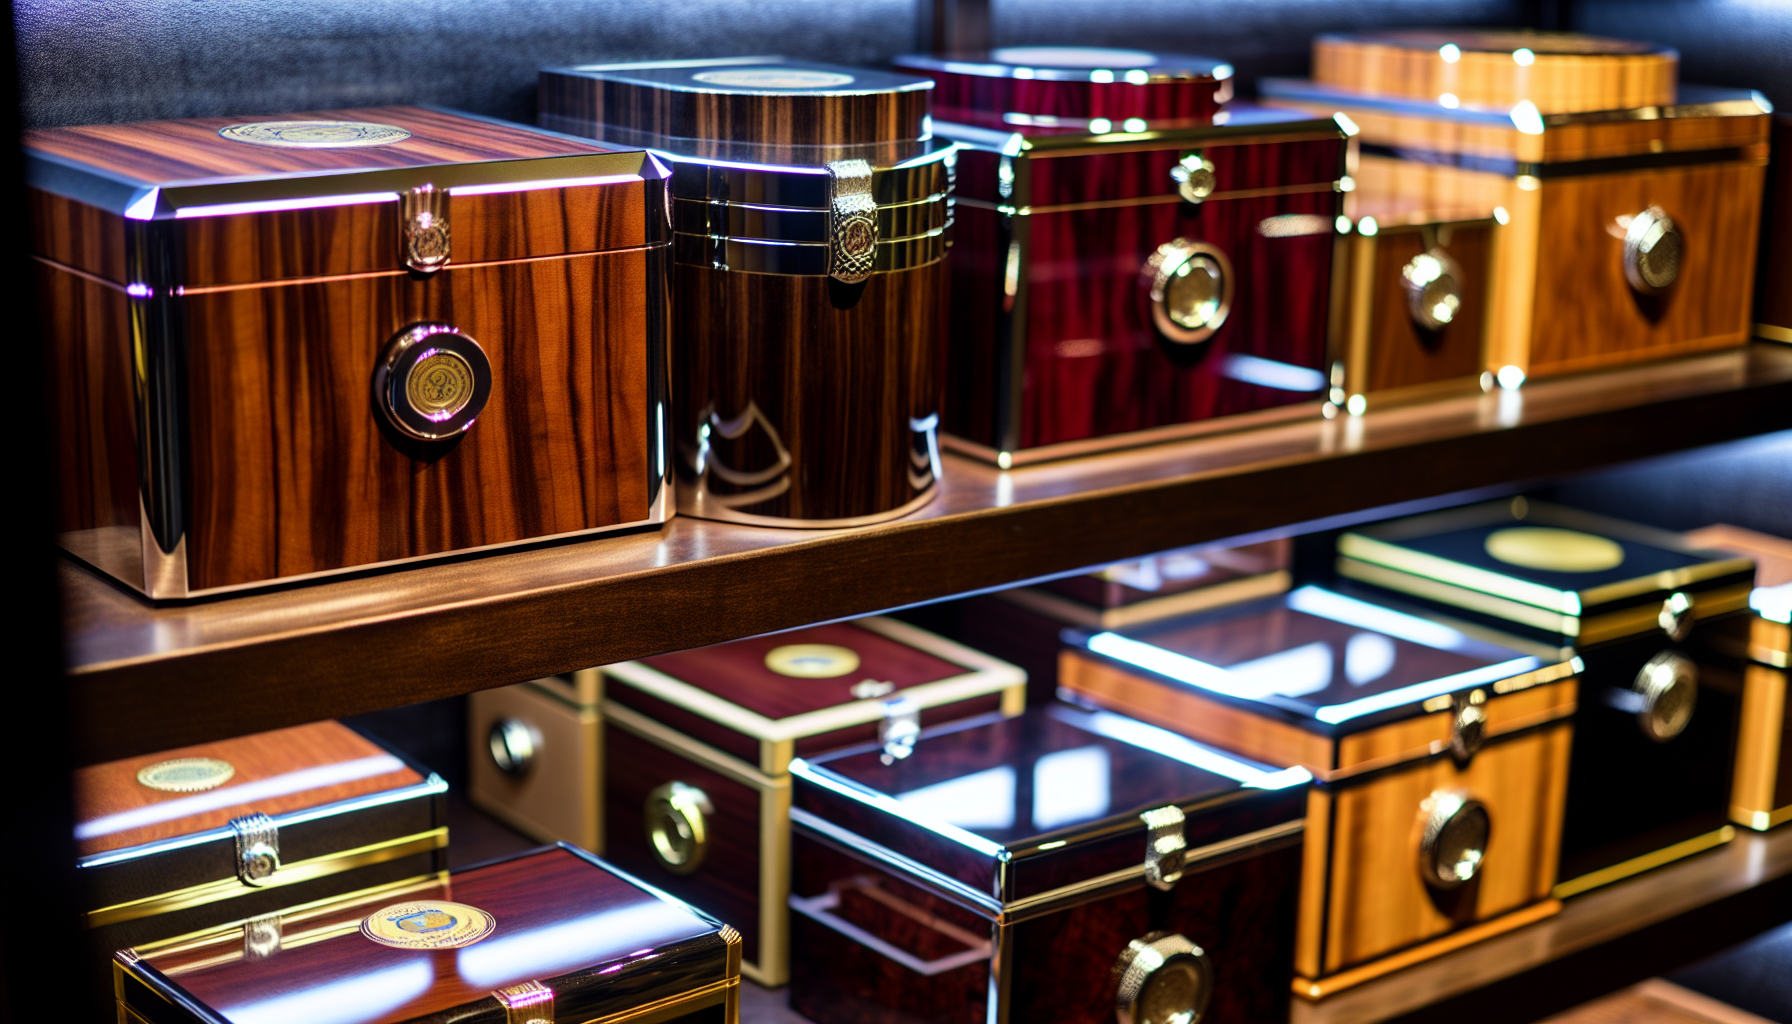 A collection of quality importers humidors on display